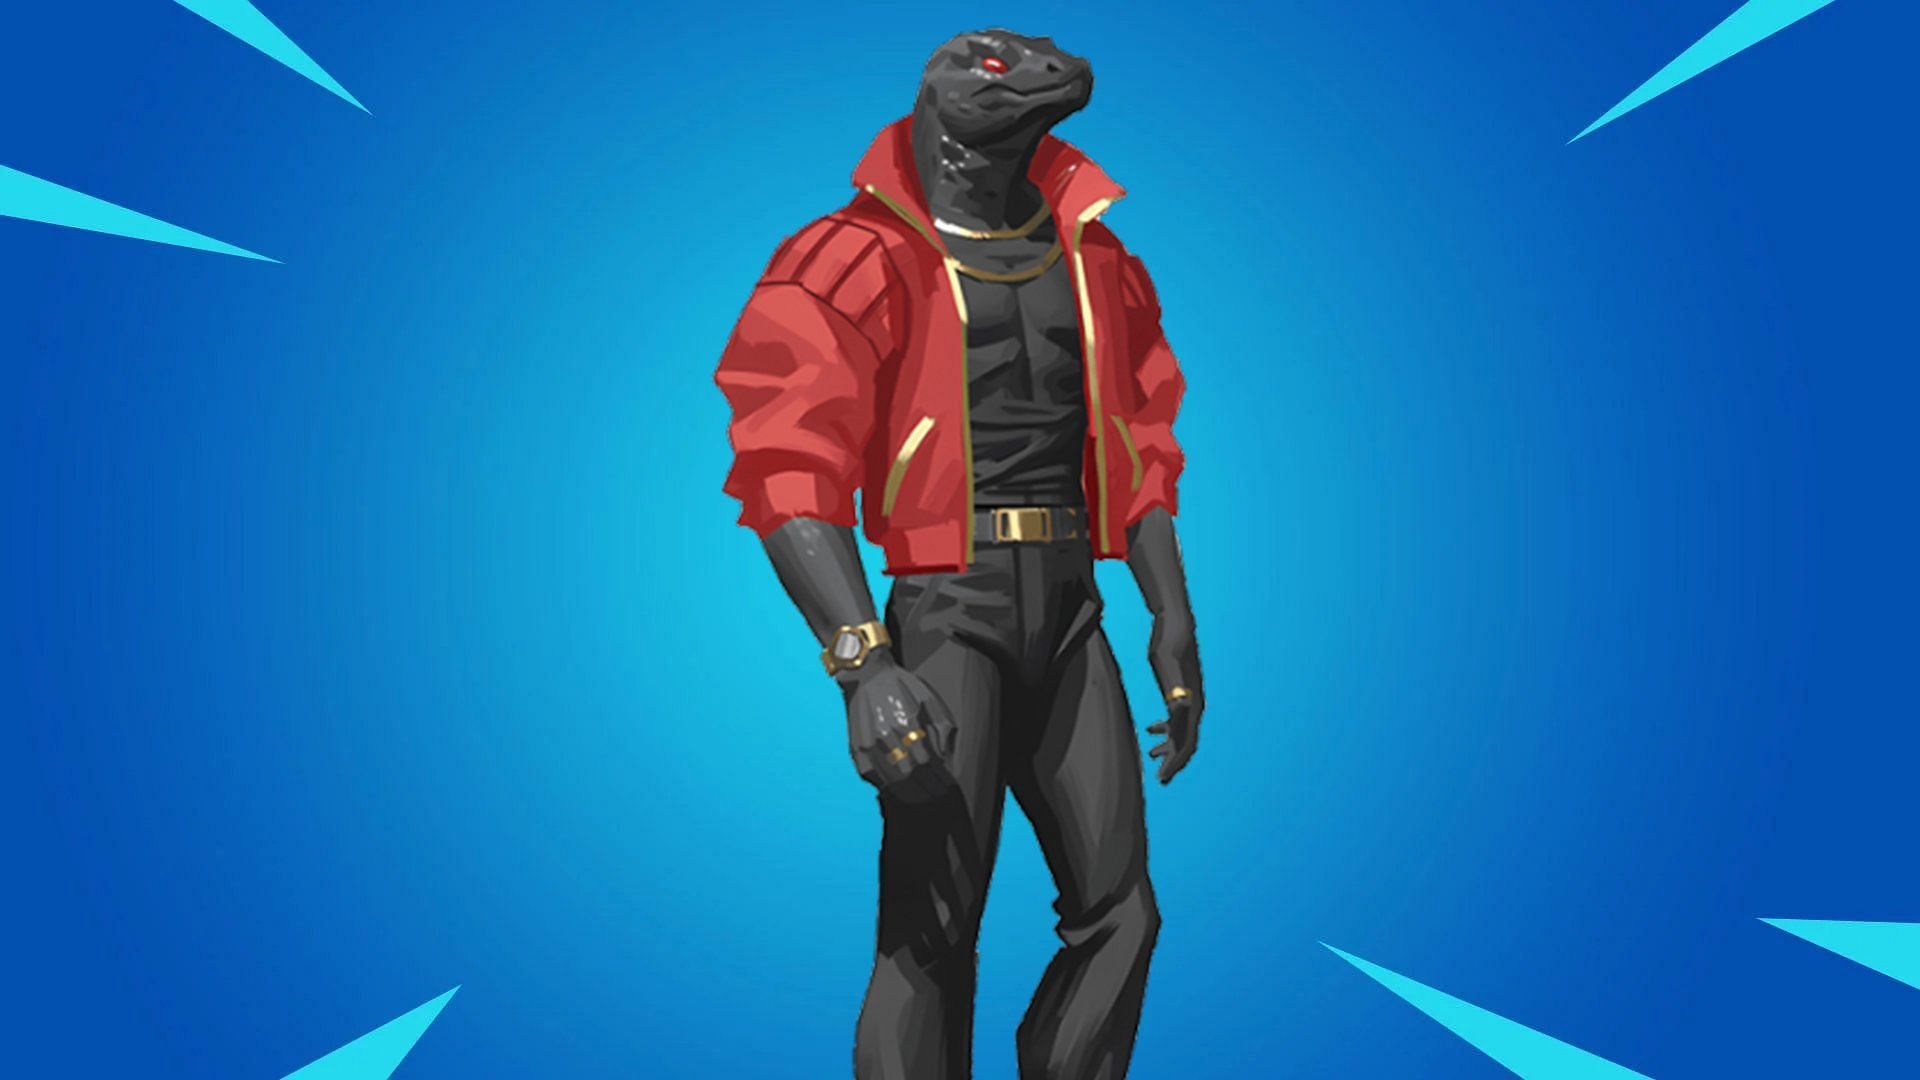 Lizard skin and Drift-remix are already turning heads in the Fortnite community (Image via Twitter/ShiinaBR)